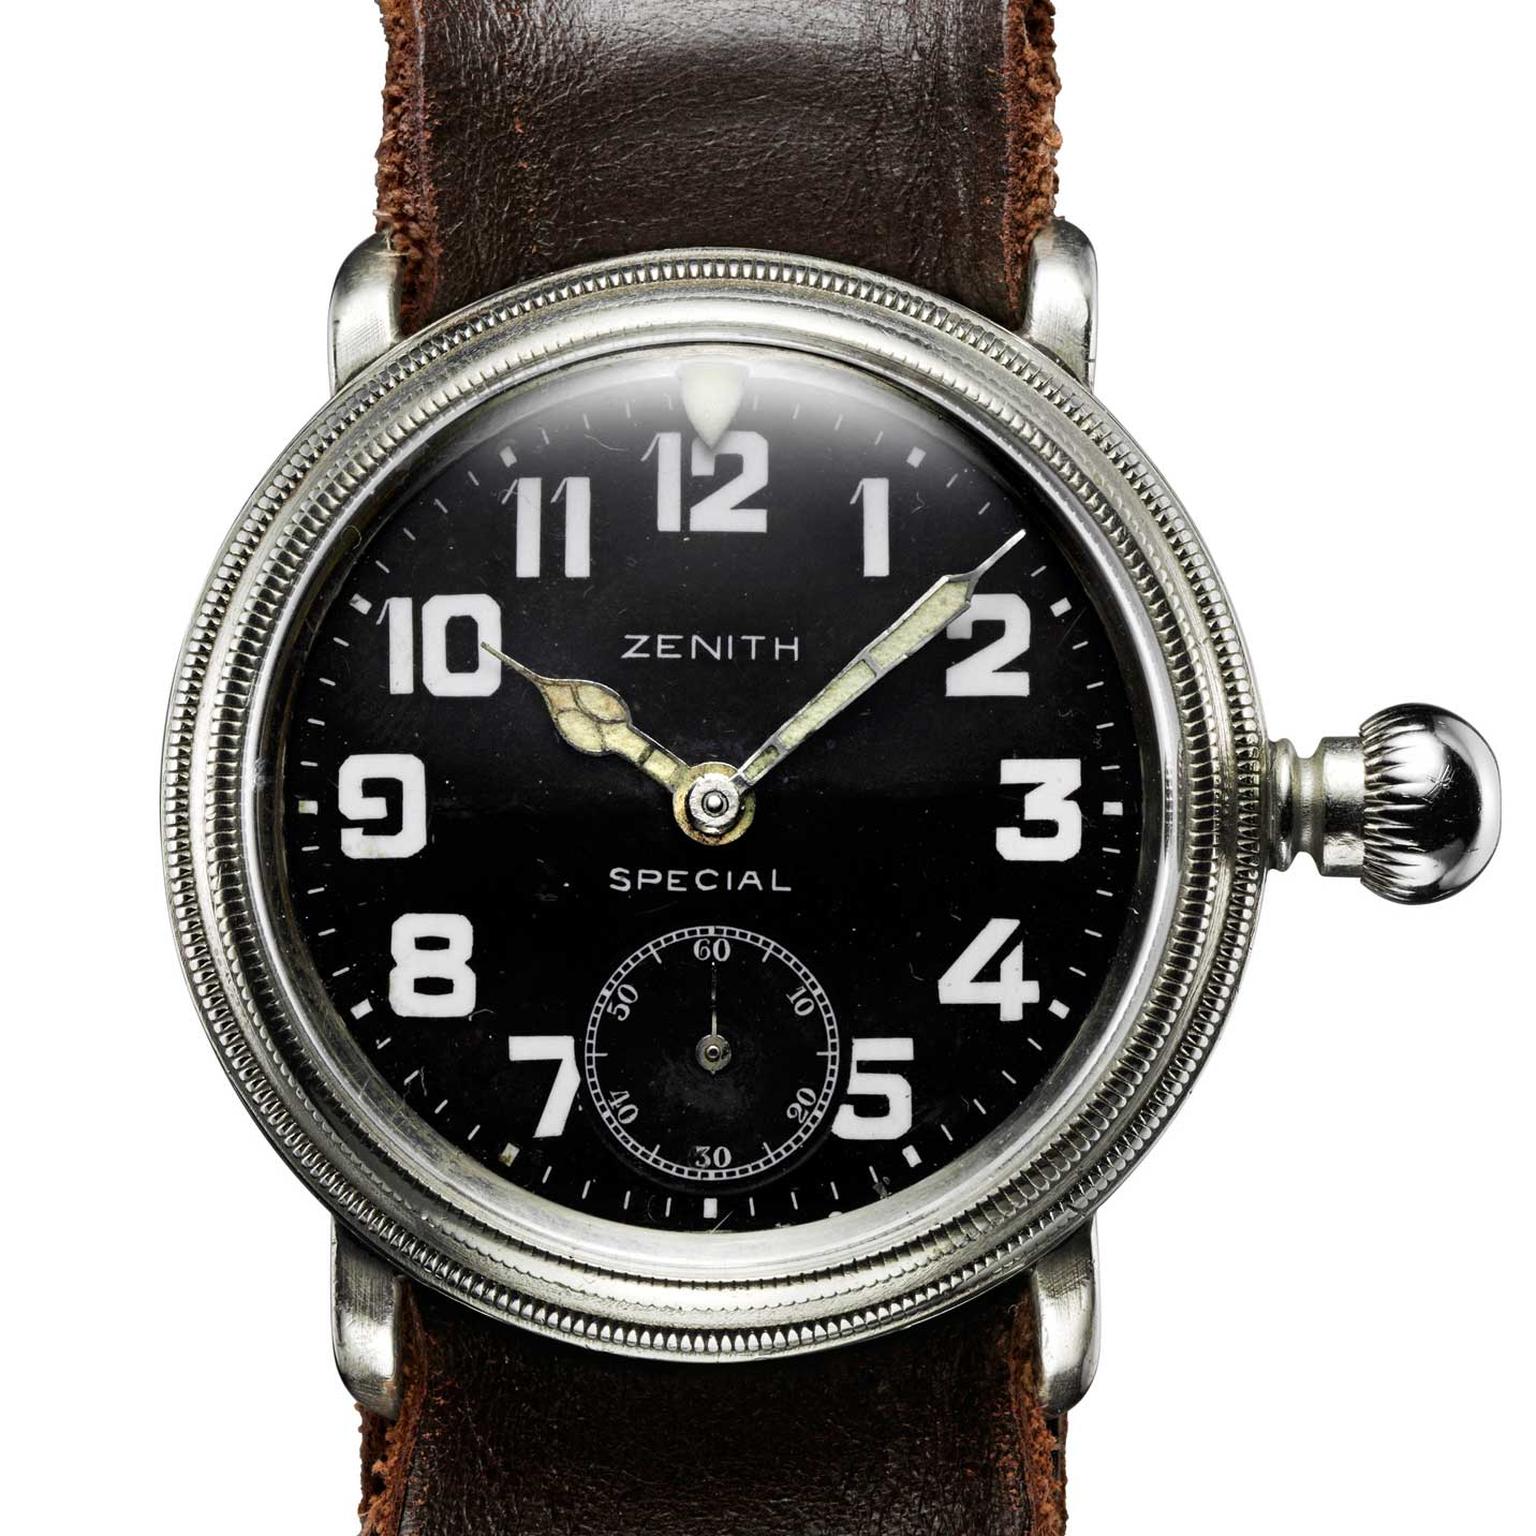 Zenith watch once owned by Louis Belriot